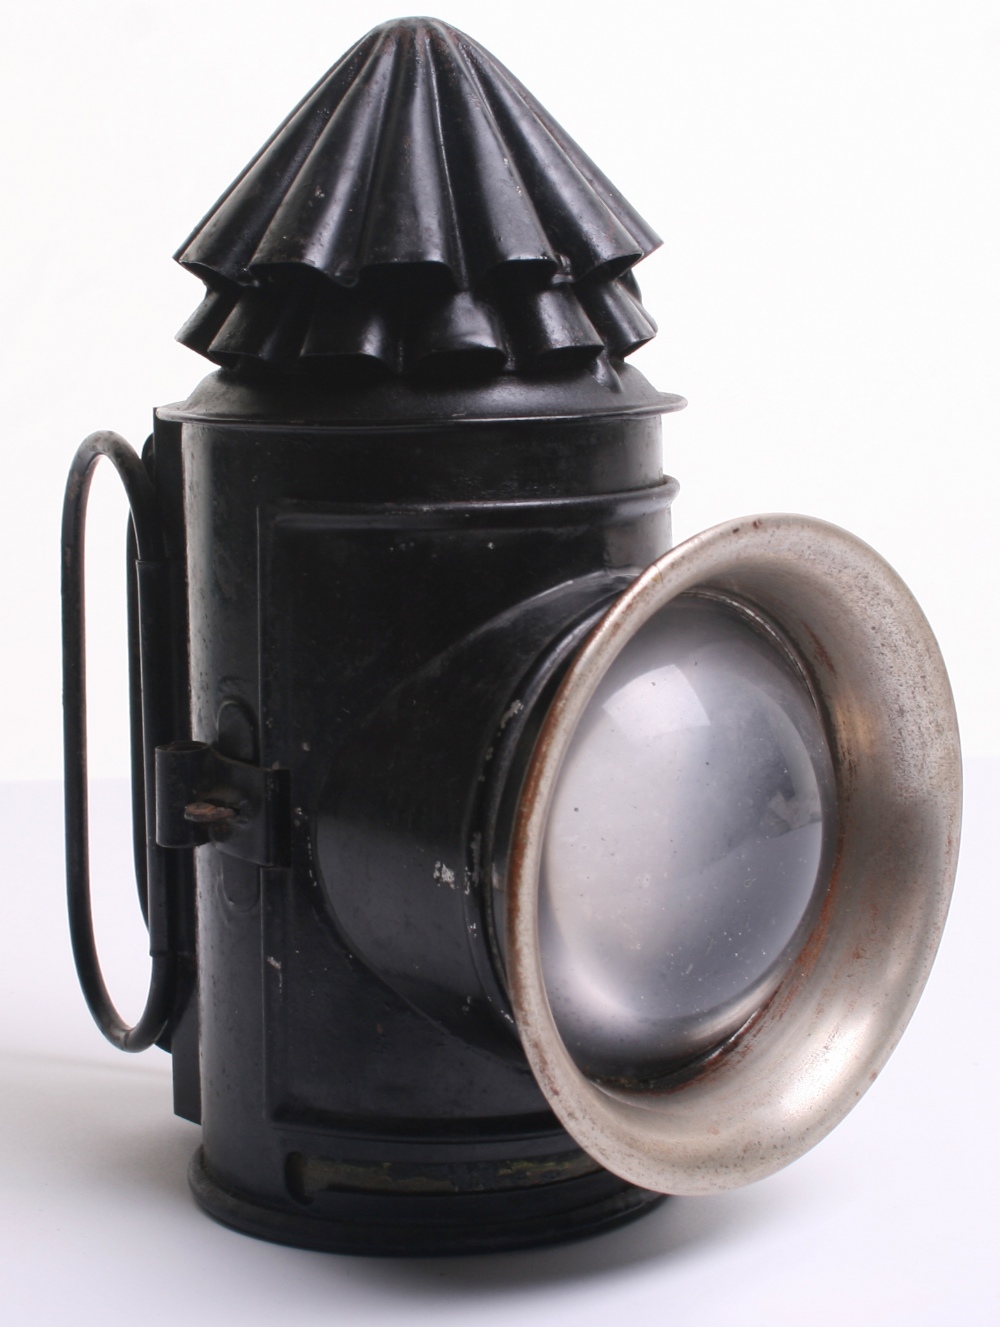 Victorian Police “Bullseye" Lantern, two stack chimney lantern, in very good condition, no makers